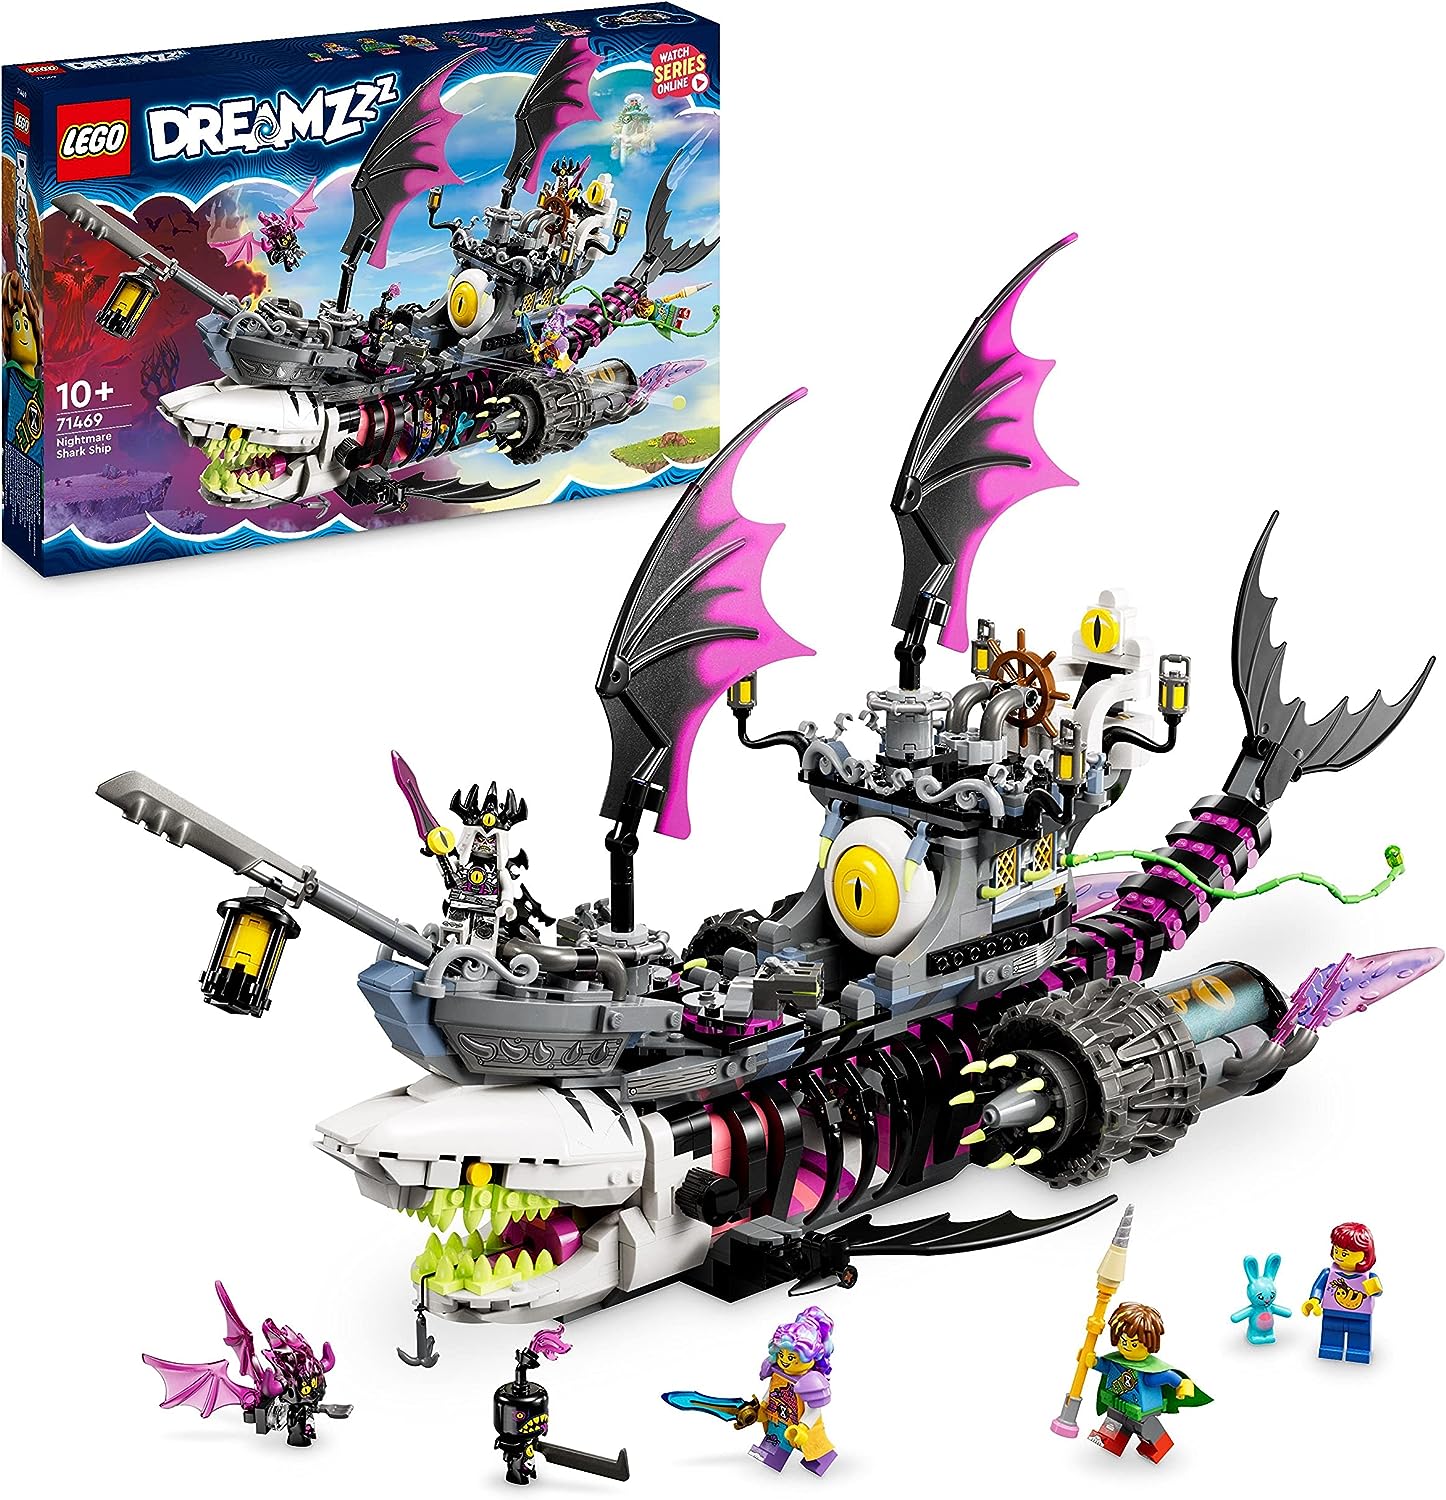 LEGO 71469 DREAMZzz Nightmare Shark Ship, Build 2 Types of Pirate Boat Toy, Model Kit with 4 Mini Figures, Toy for Kids, Girls, Boys, Based on TV Show